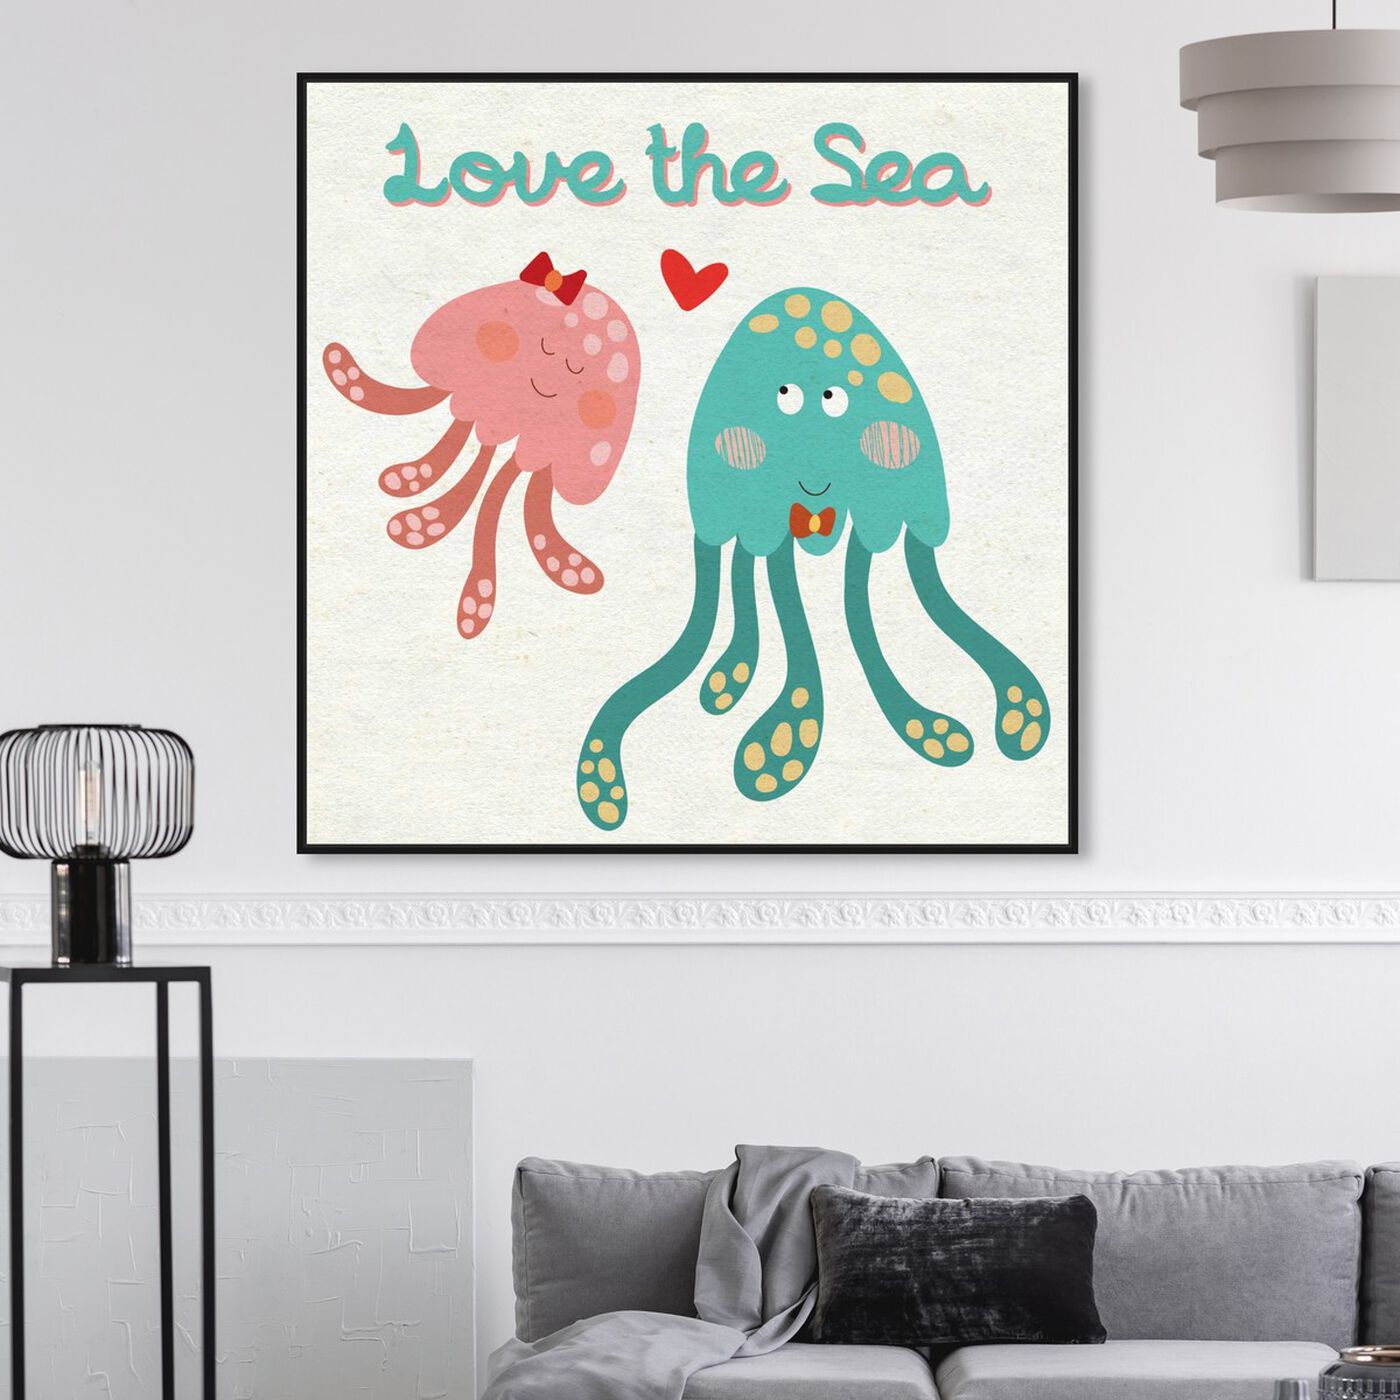 Hanging view of Love the Sea featuring animals and sea animals art.